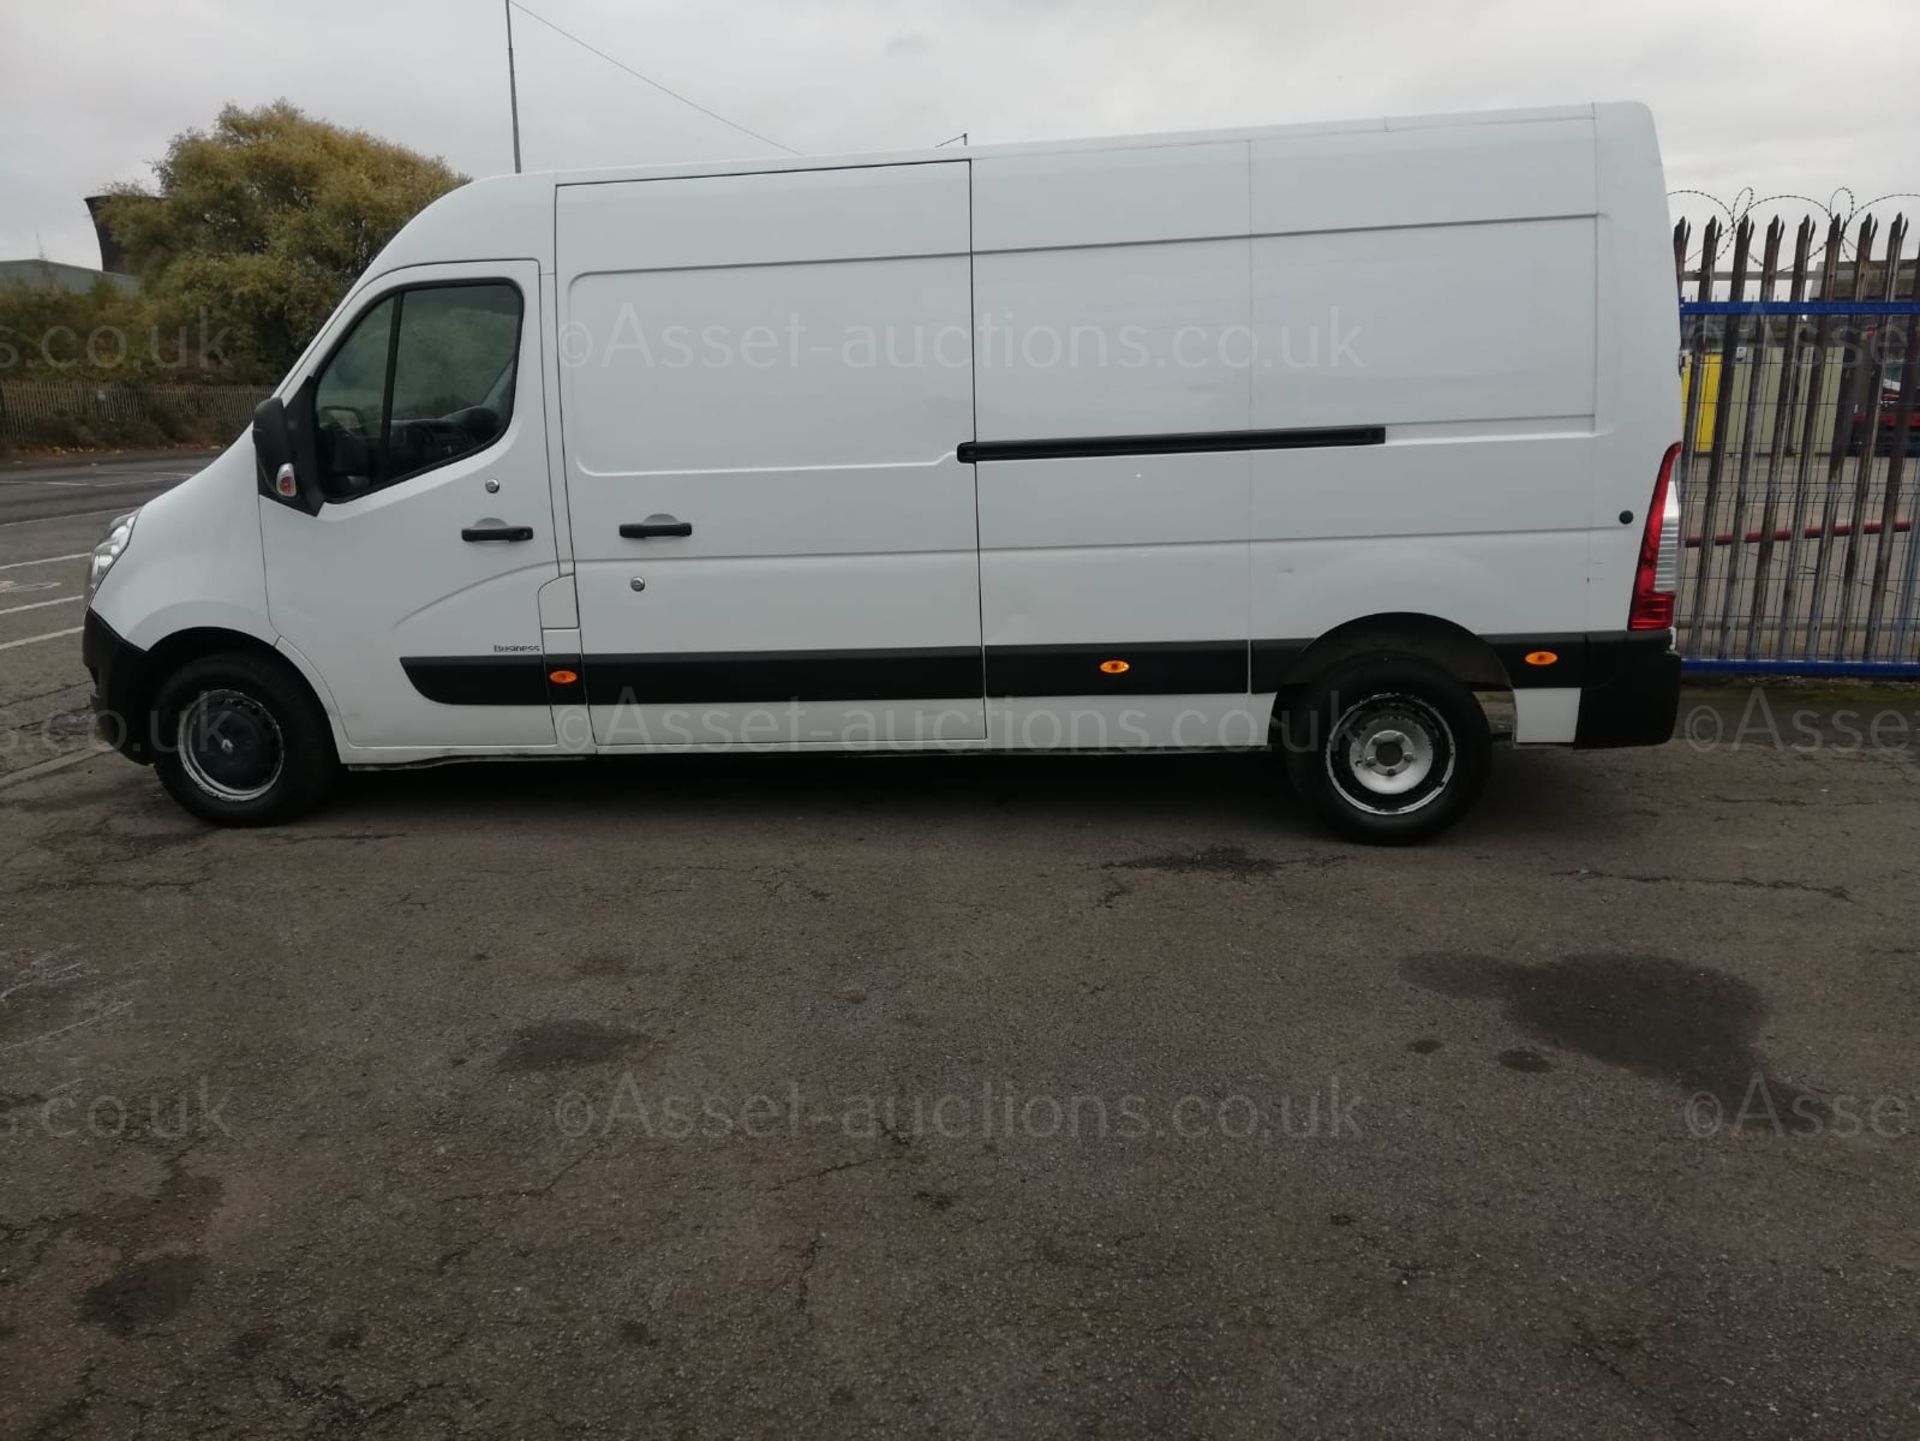 2017/17 RENAULT MASTER LM35 BUSINESS DCI L3H2 WHITE PANEL VAN, 106K MILES WITH SERVICE HISTORY - Image 4 of 9